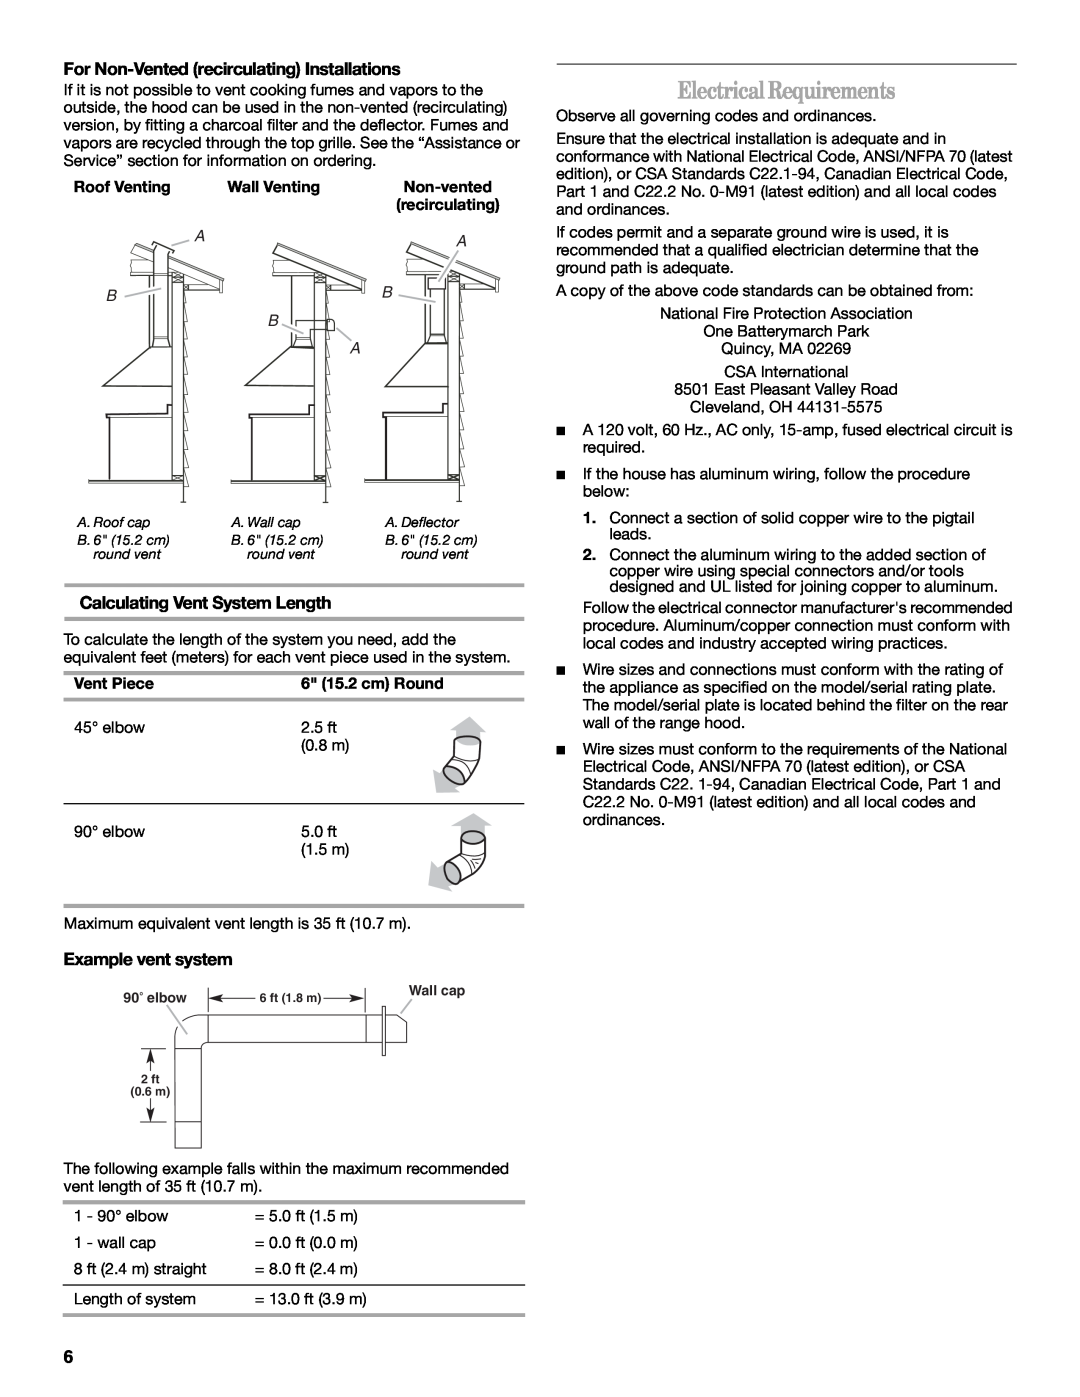 Whirlpool GXW7230DAS Electrical Requirements, For Non-Vented recirculating Installations, Calculating Vent System Length 